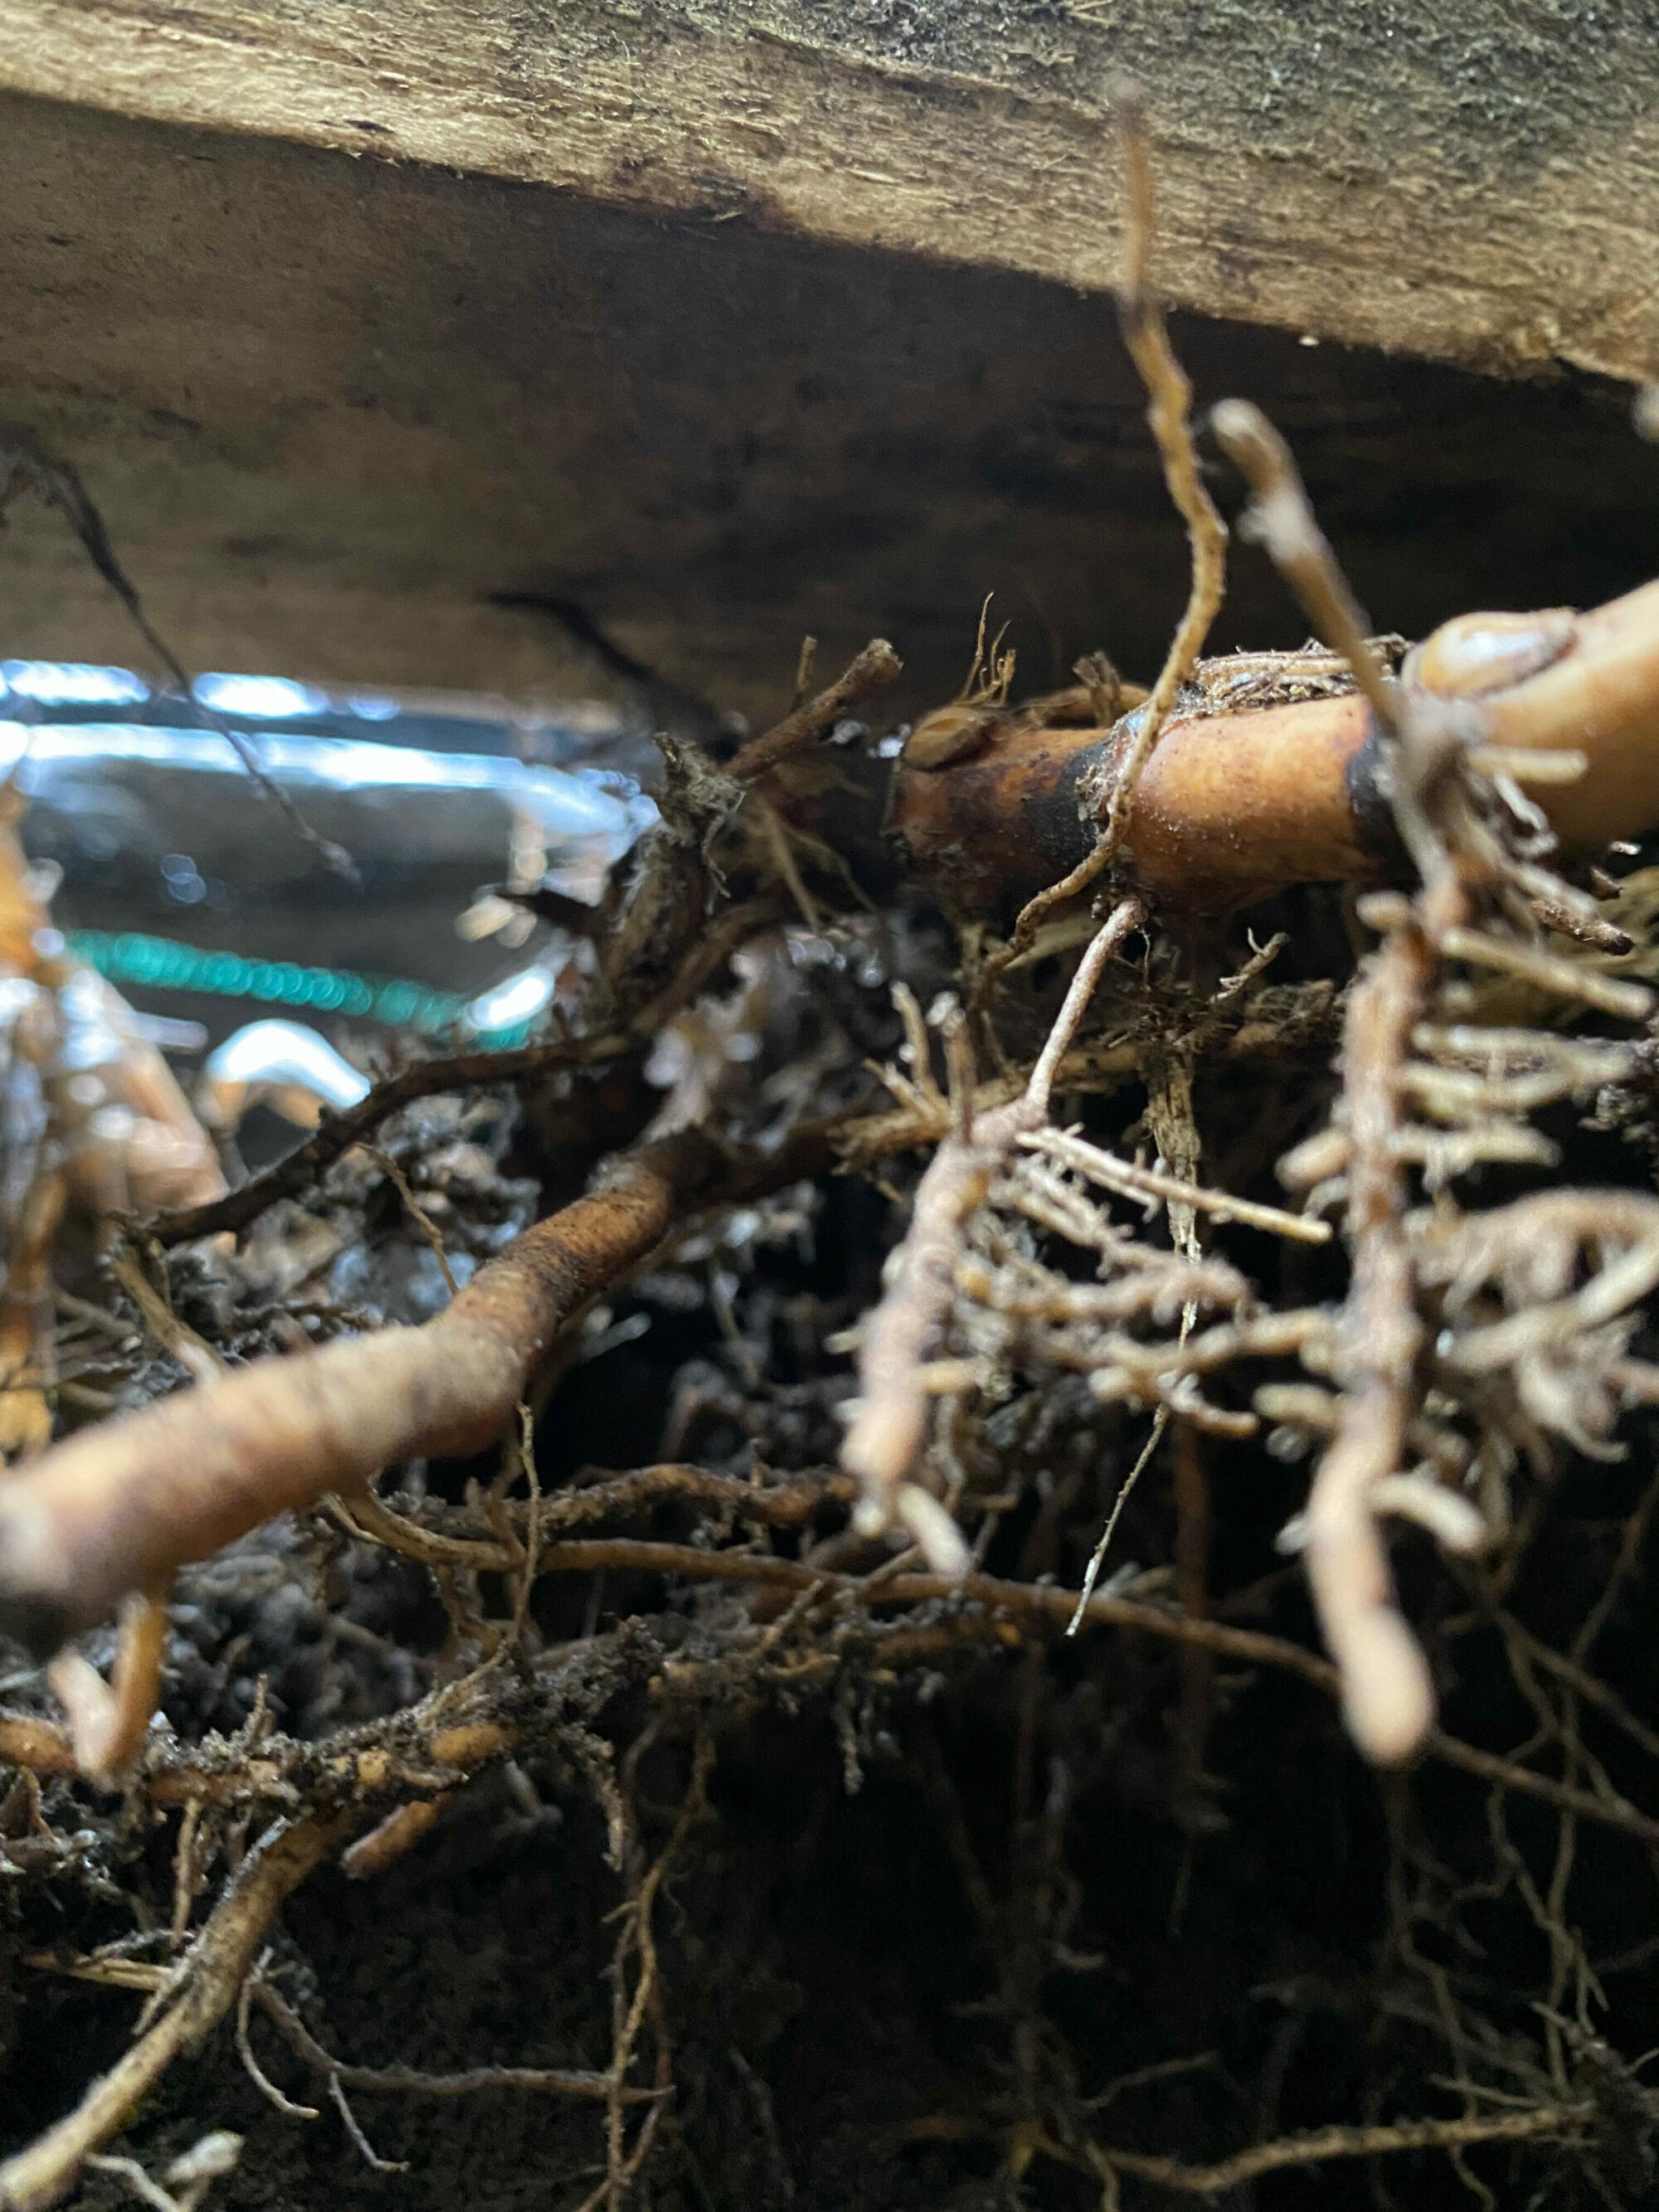 bamboo roots and rhizome extending from under a fence